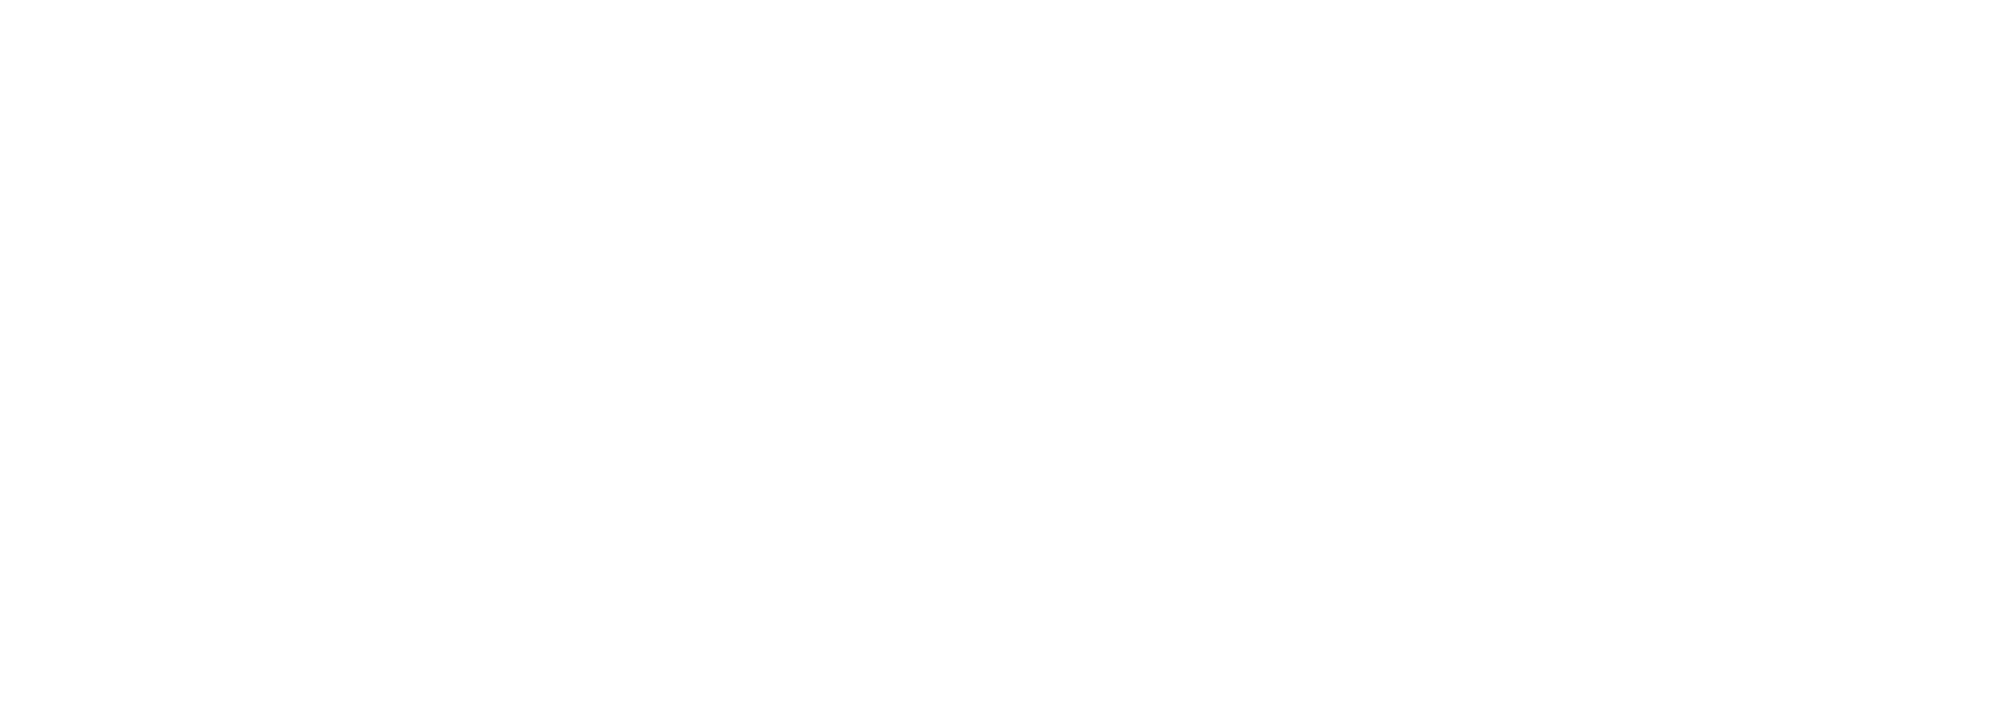 Fire-Connect-logo-white-1